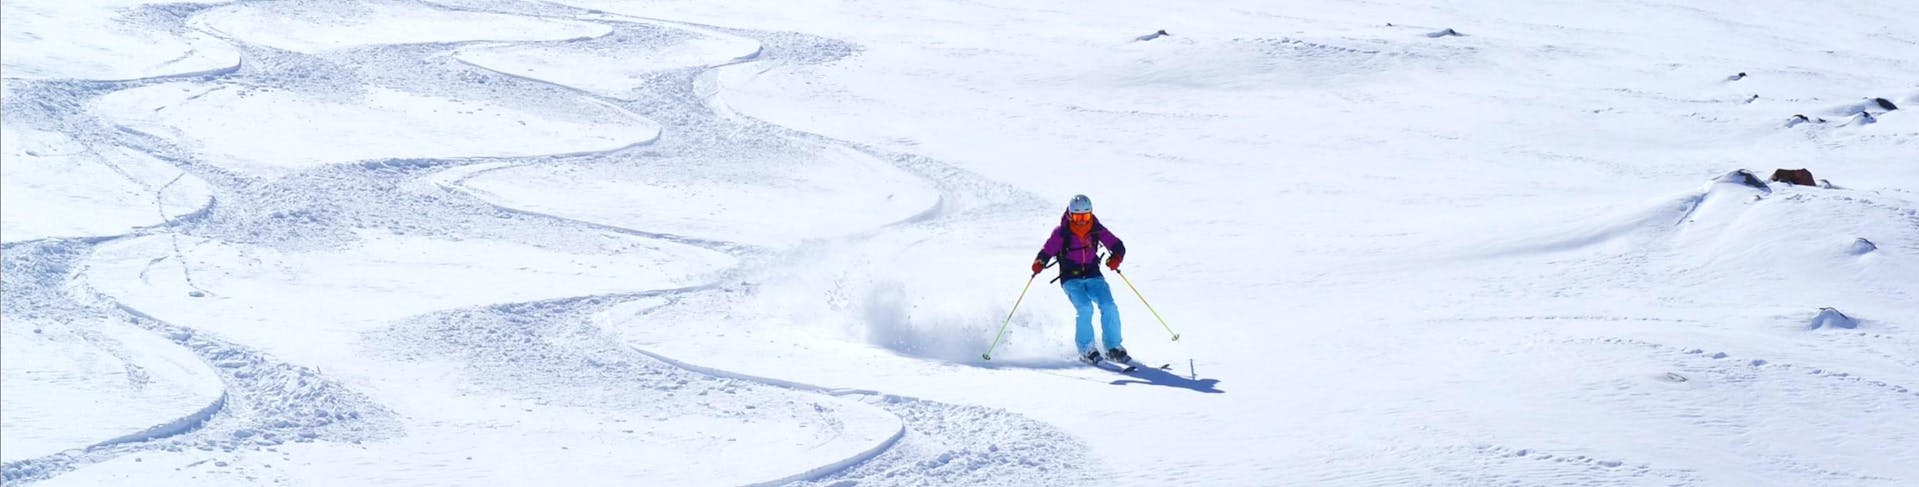 A skier crosses a powder field during teen and adults ski lessons with the ESI Pro Skiing Châtel.